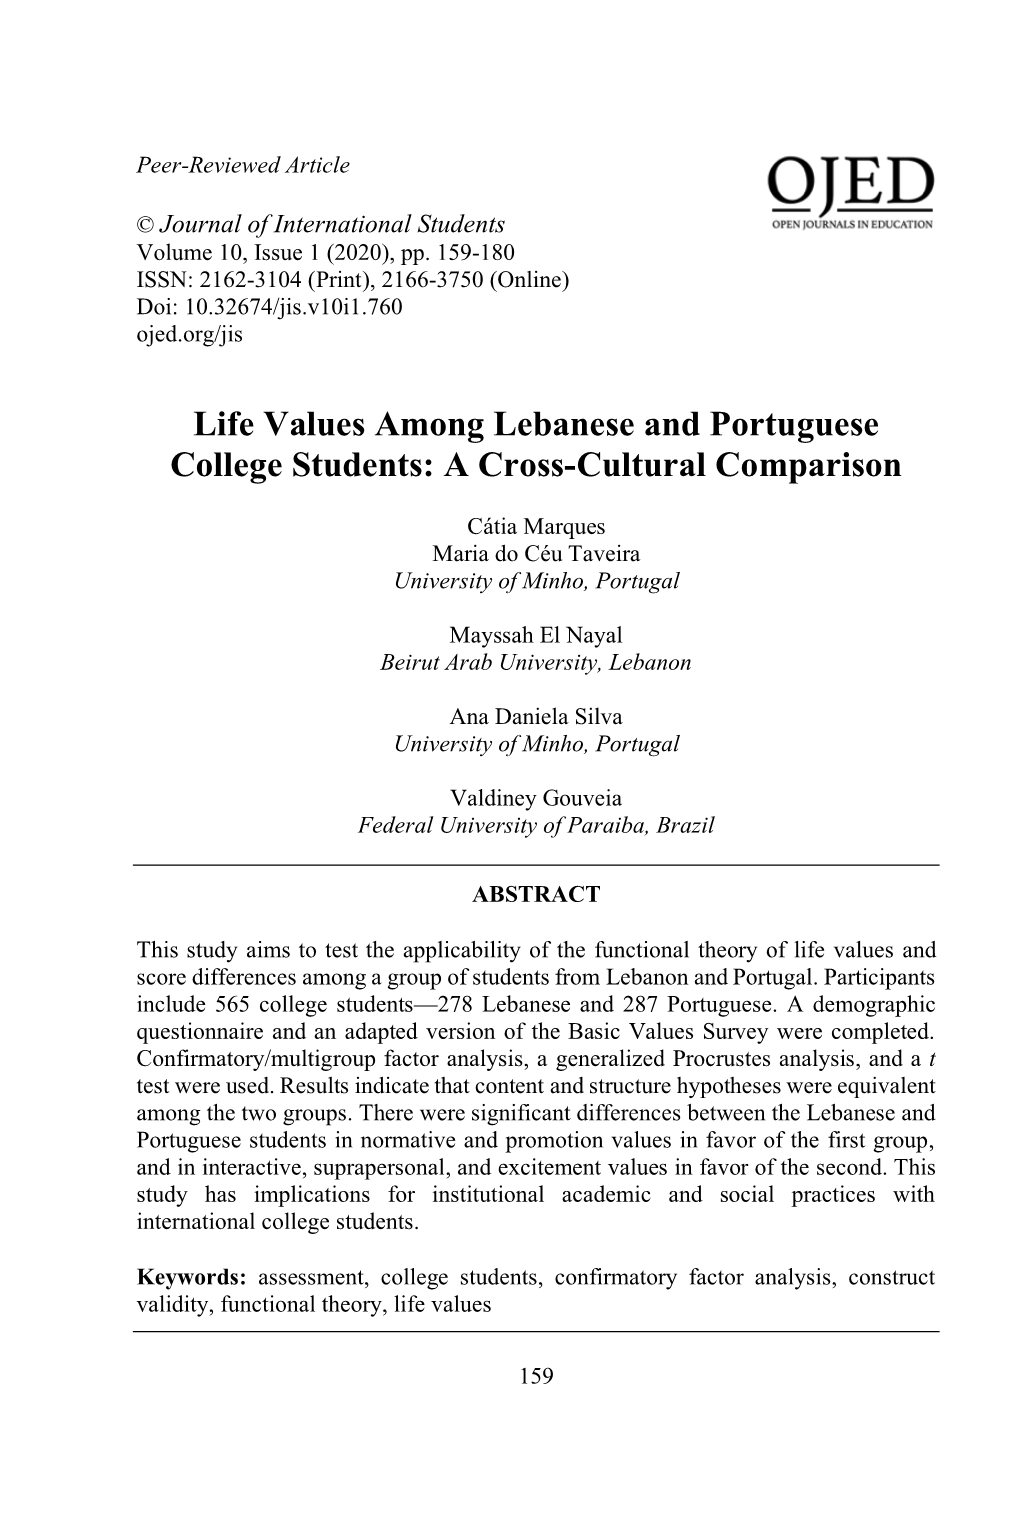 Life Values Among Lebanese and Portuguese College Students: a Cross-Cultural Comparison